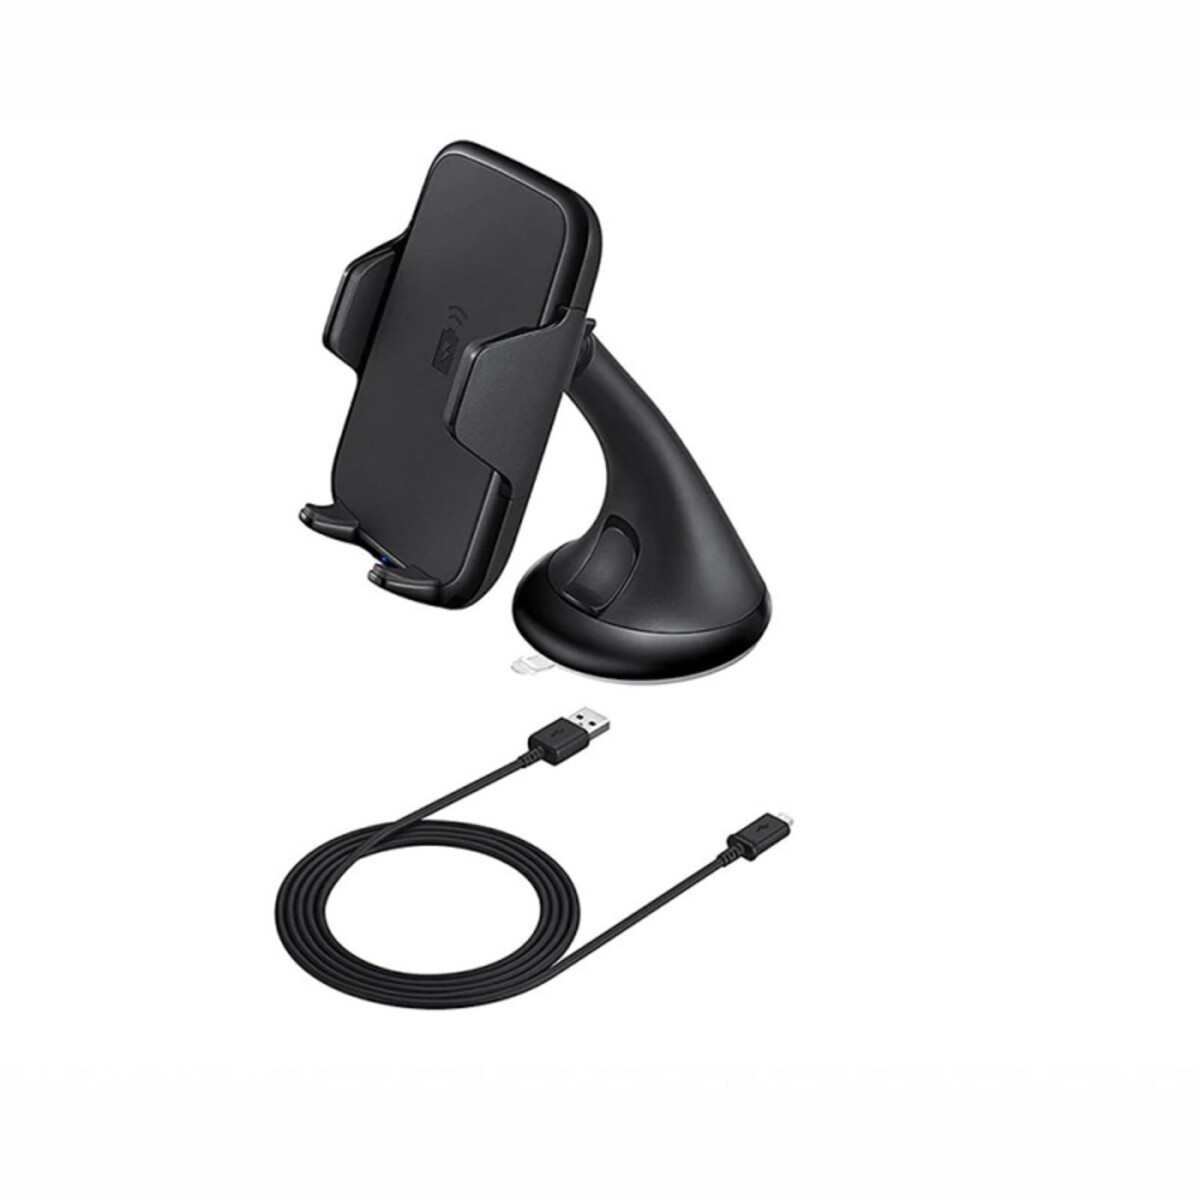 Trands Wireless Charger Vehicle Dock WC4164